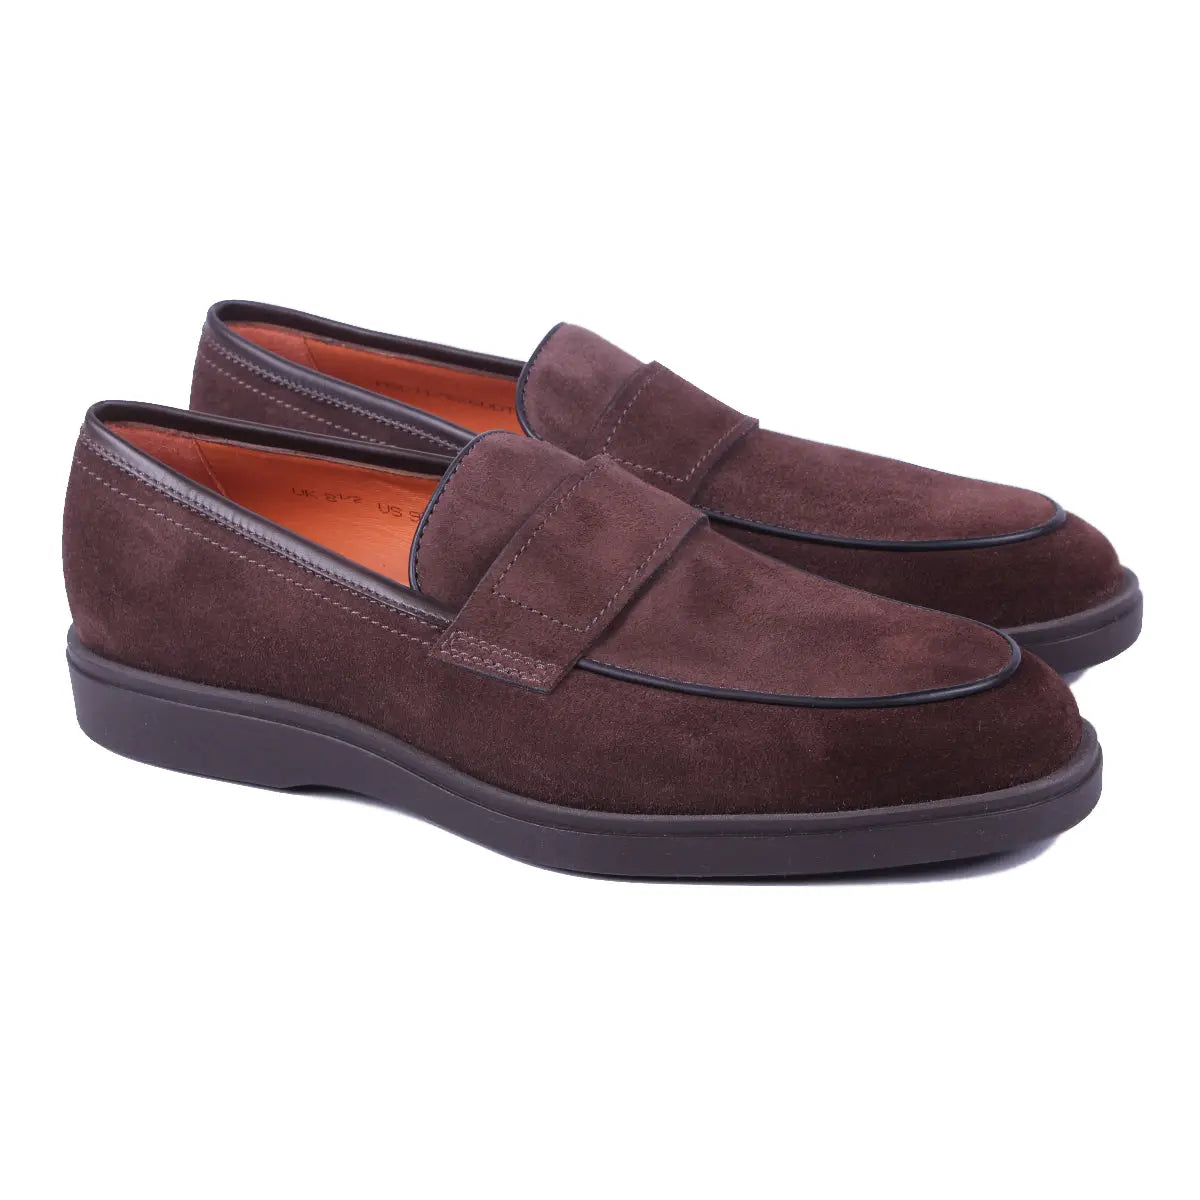 Brown Suede Classic Slip-On Loafers  Santoni   